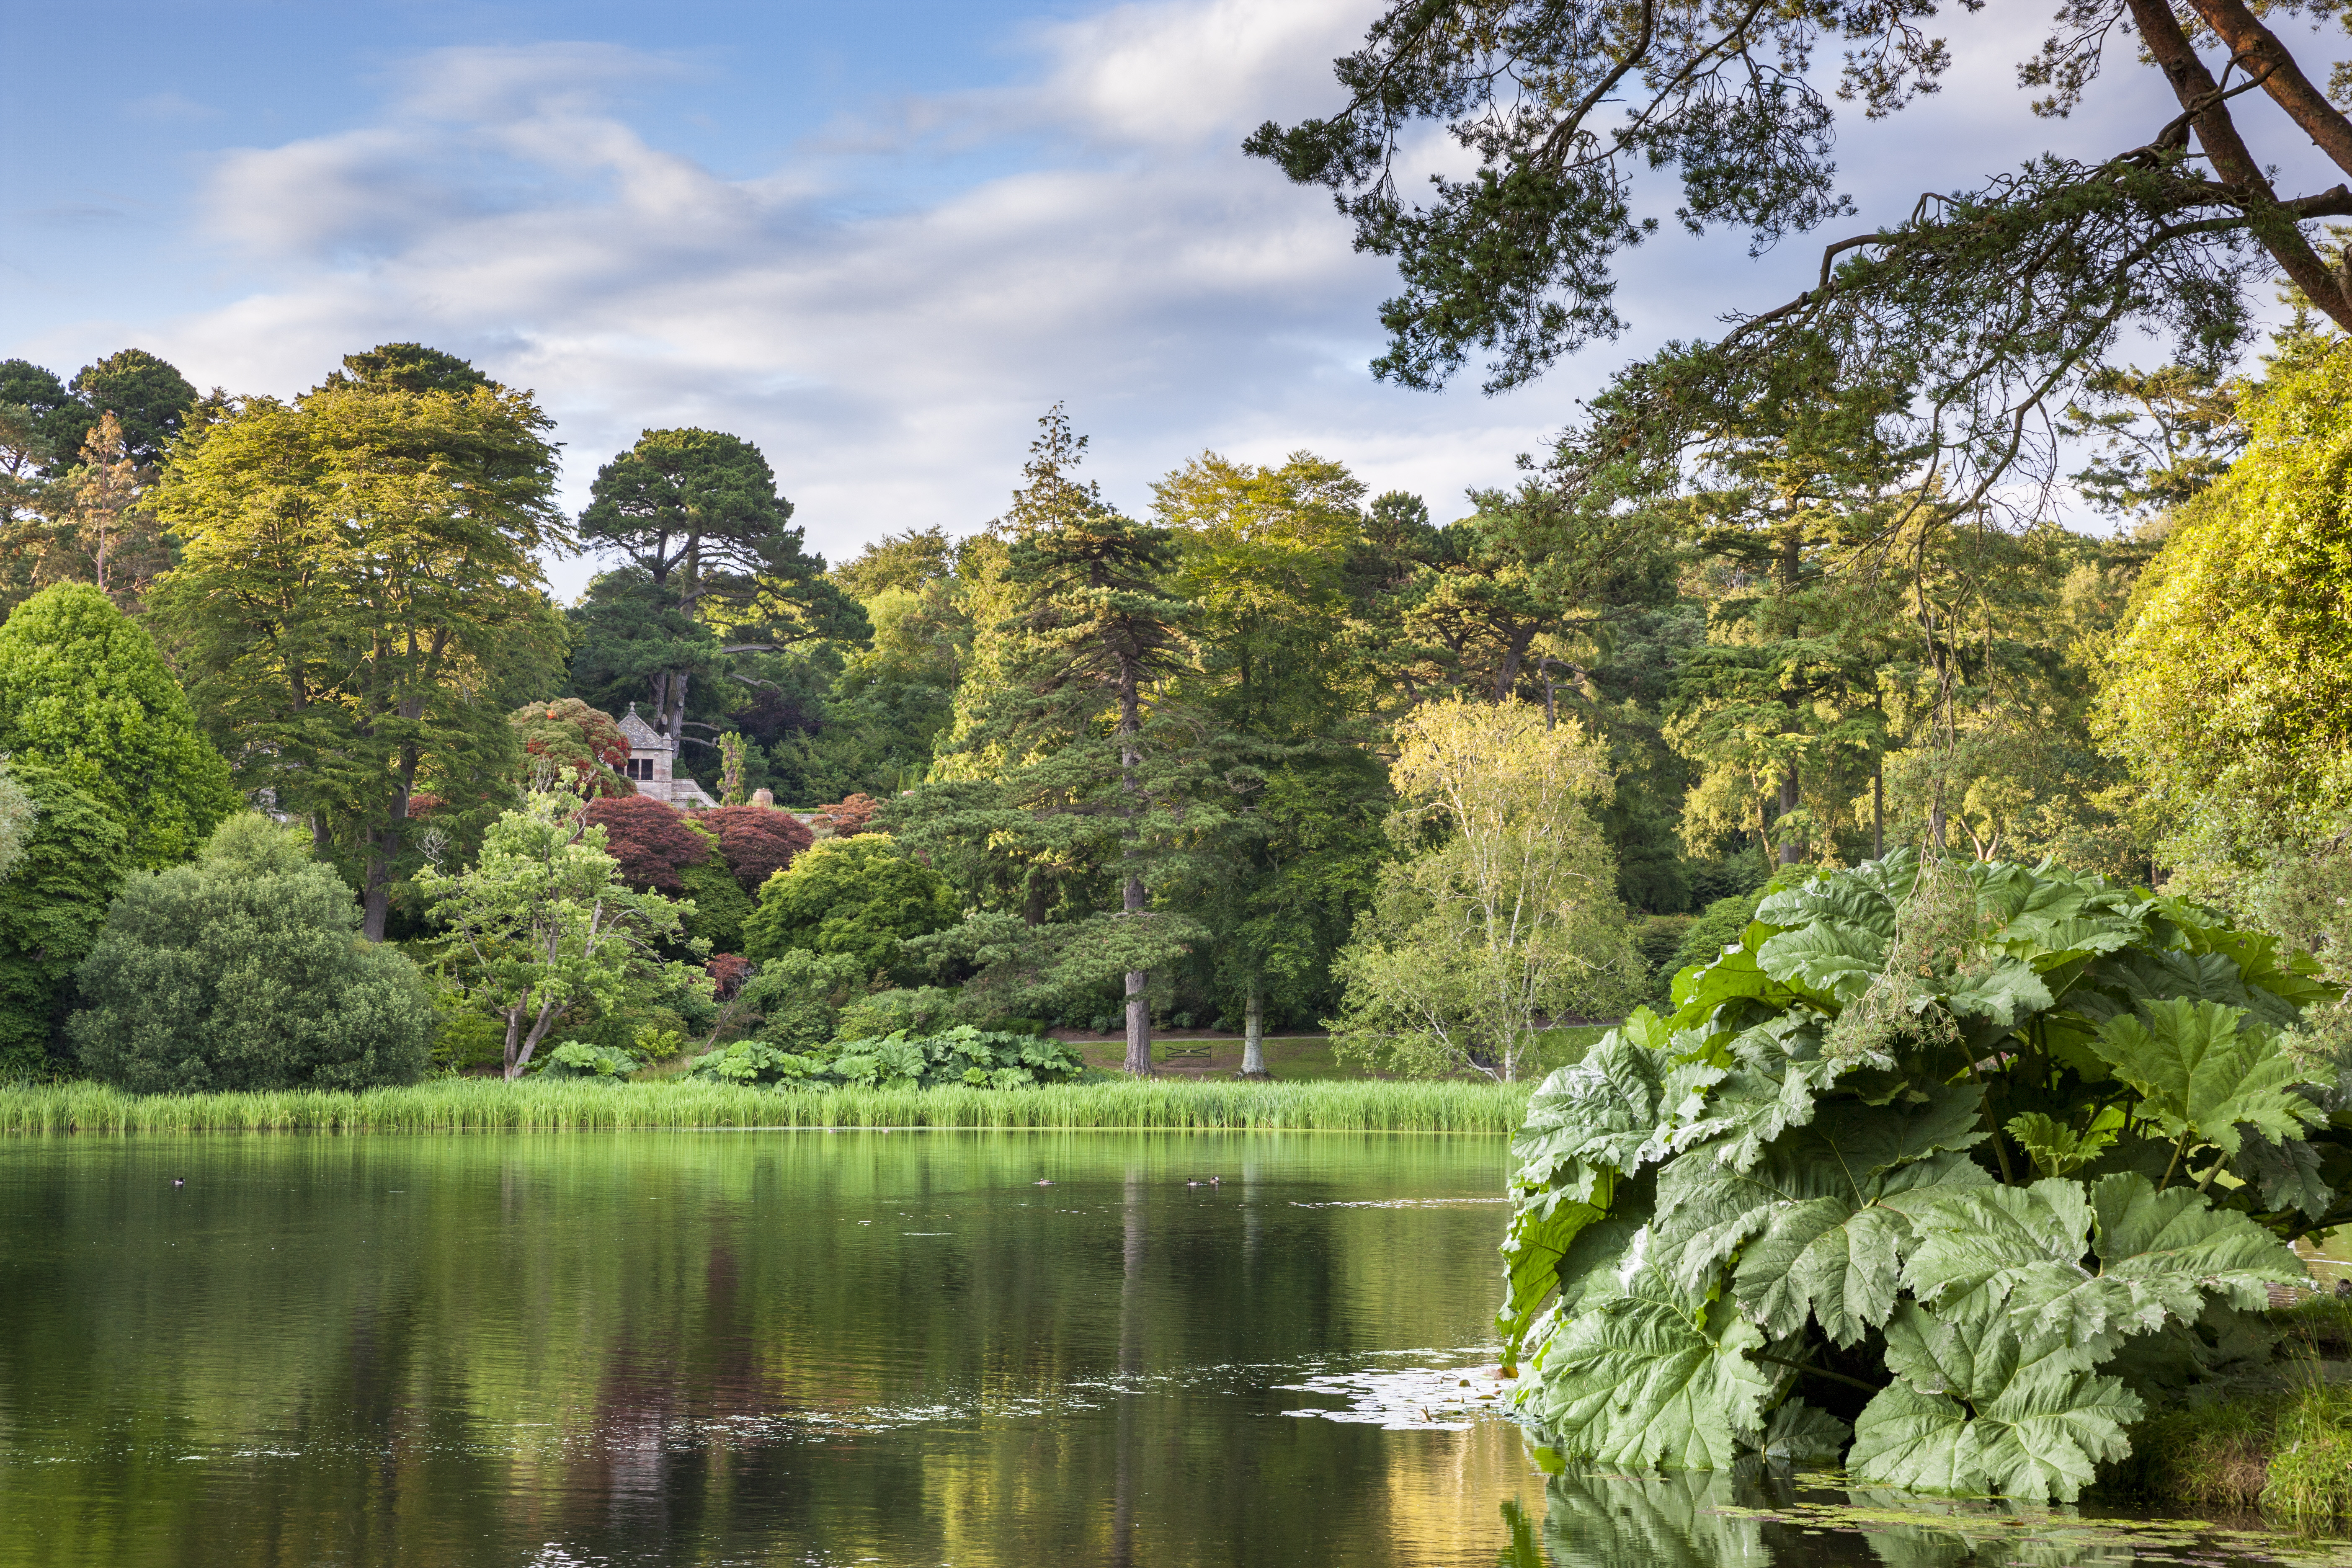 Mount Stewart in County Down will reopen as the Northern Ireland Executive has allowed the reopening of outdoor spaces (National Trust Images/Andrew Butler/PA)